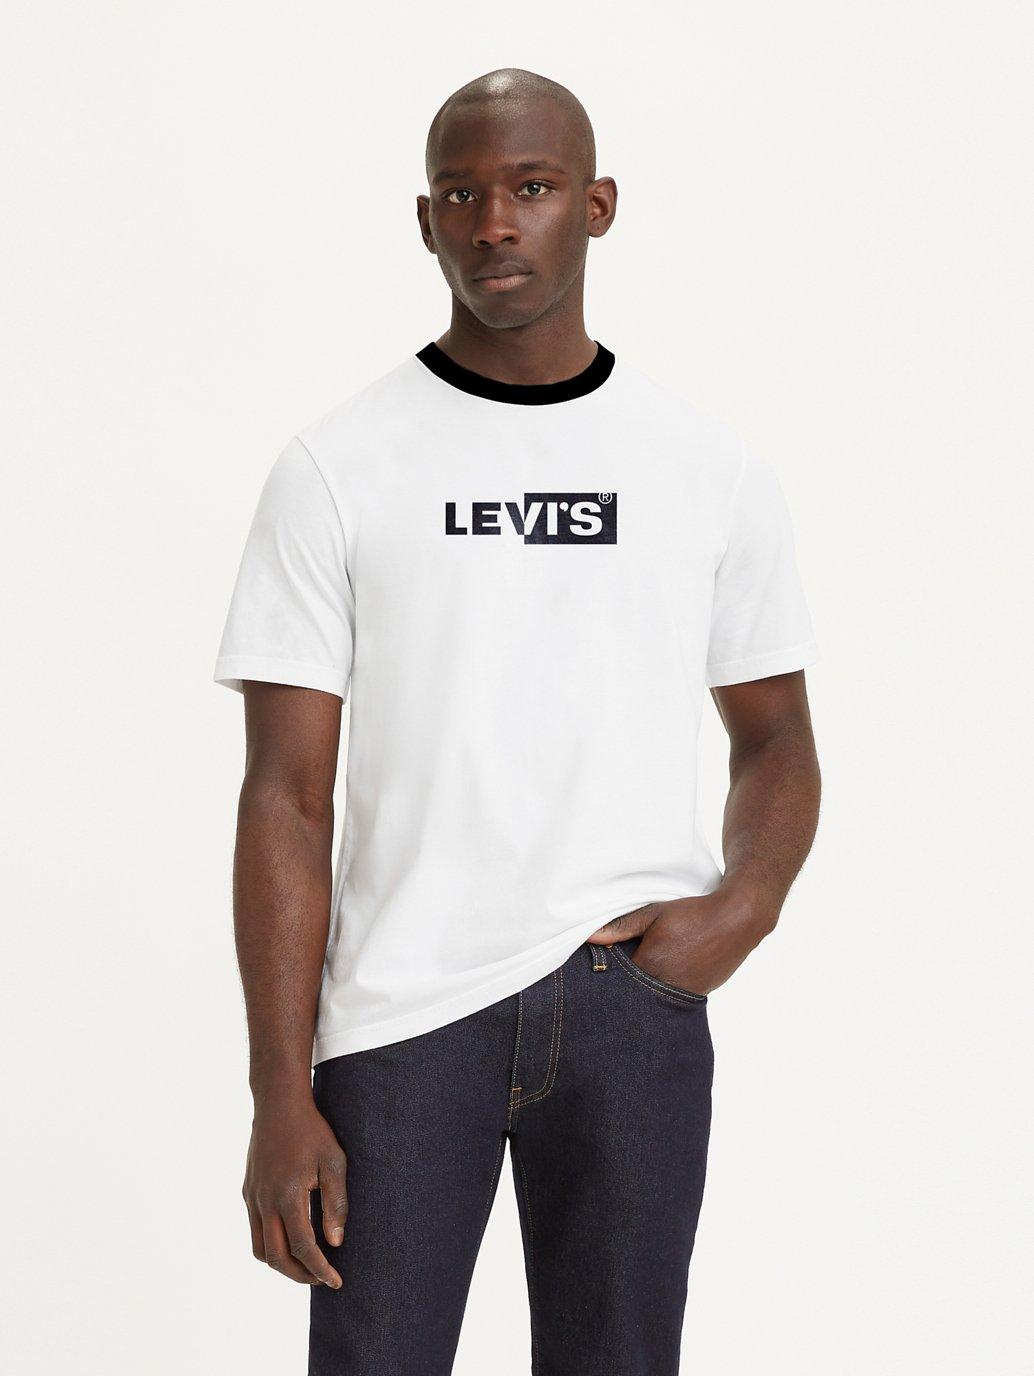 Buy Levi's® Men's Relaxed Short-Sleeve Graphic T-Shirt | Levi’s ...